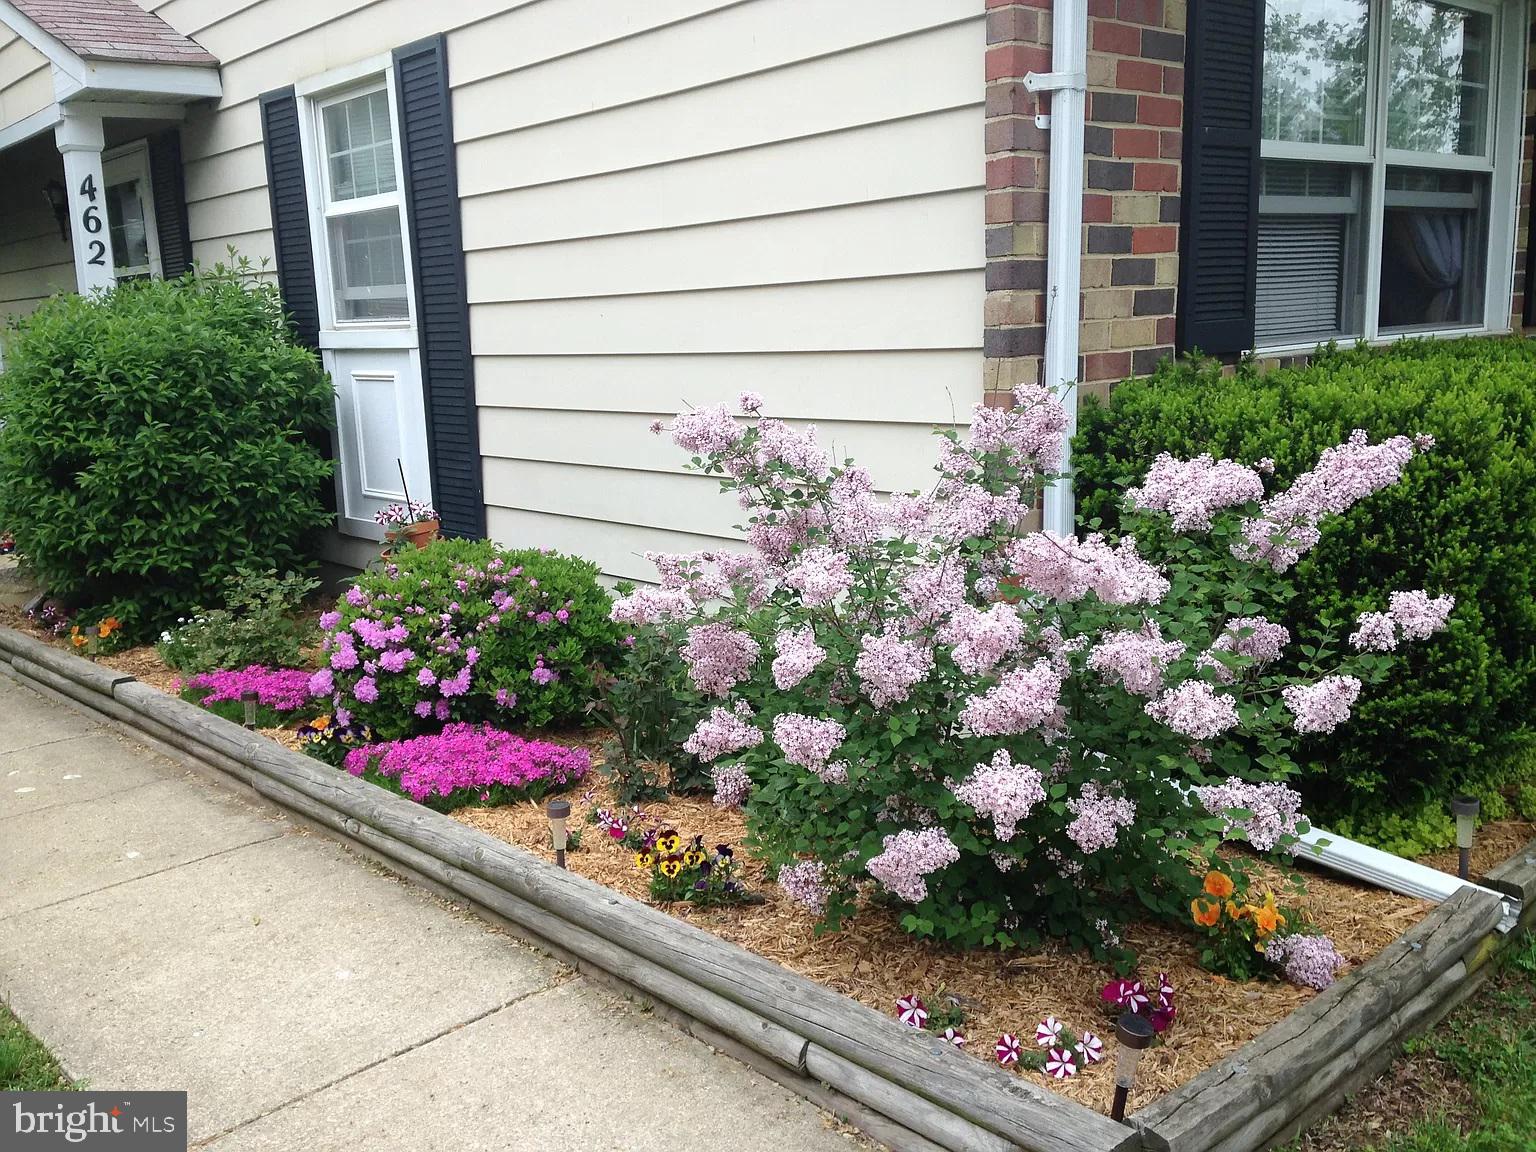 a bunch of flowers in front of house